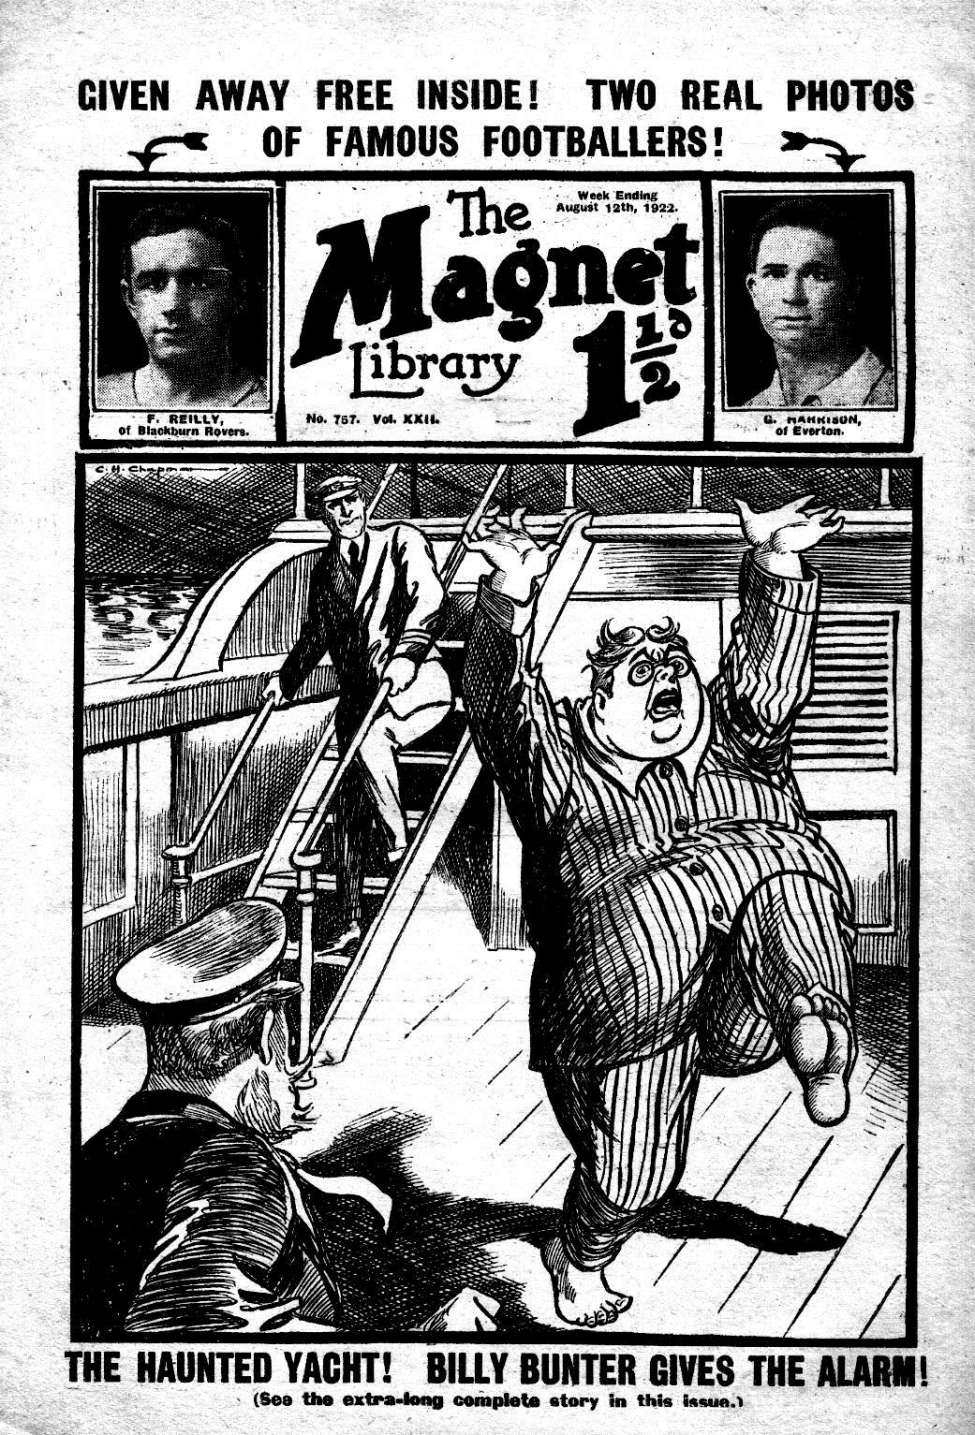 Book Cover For The Magnet 757 - The Schoolboy Yachtsmen!